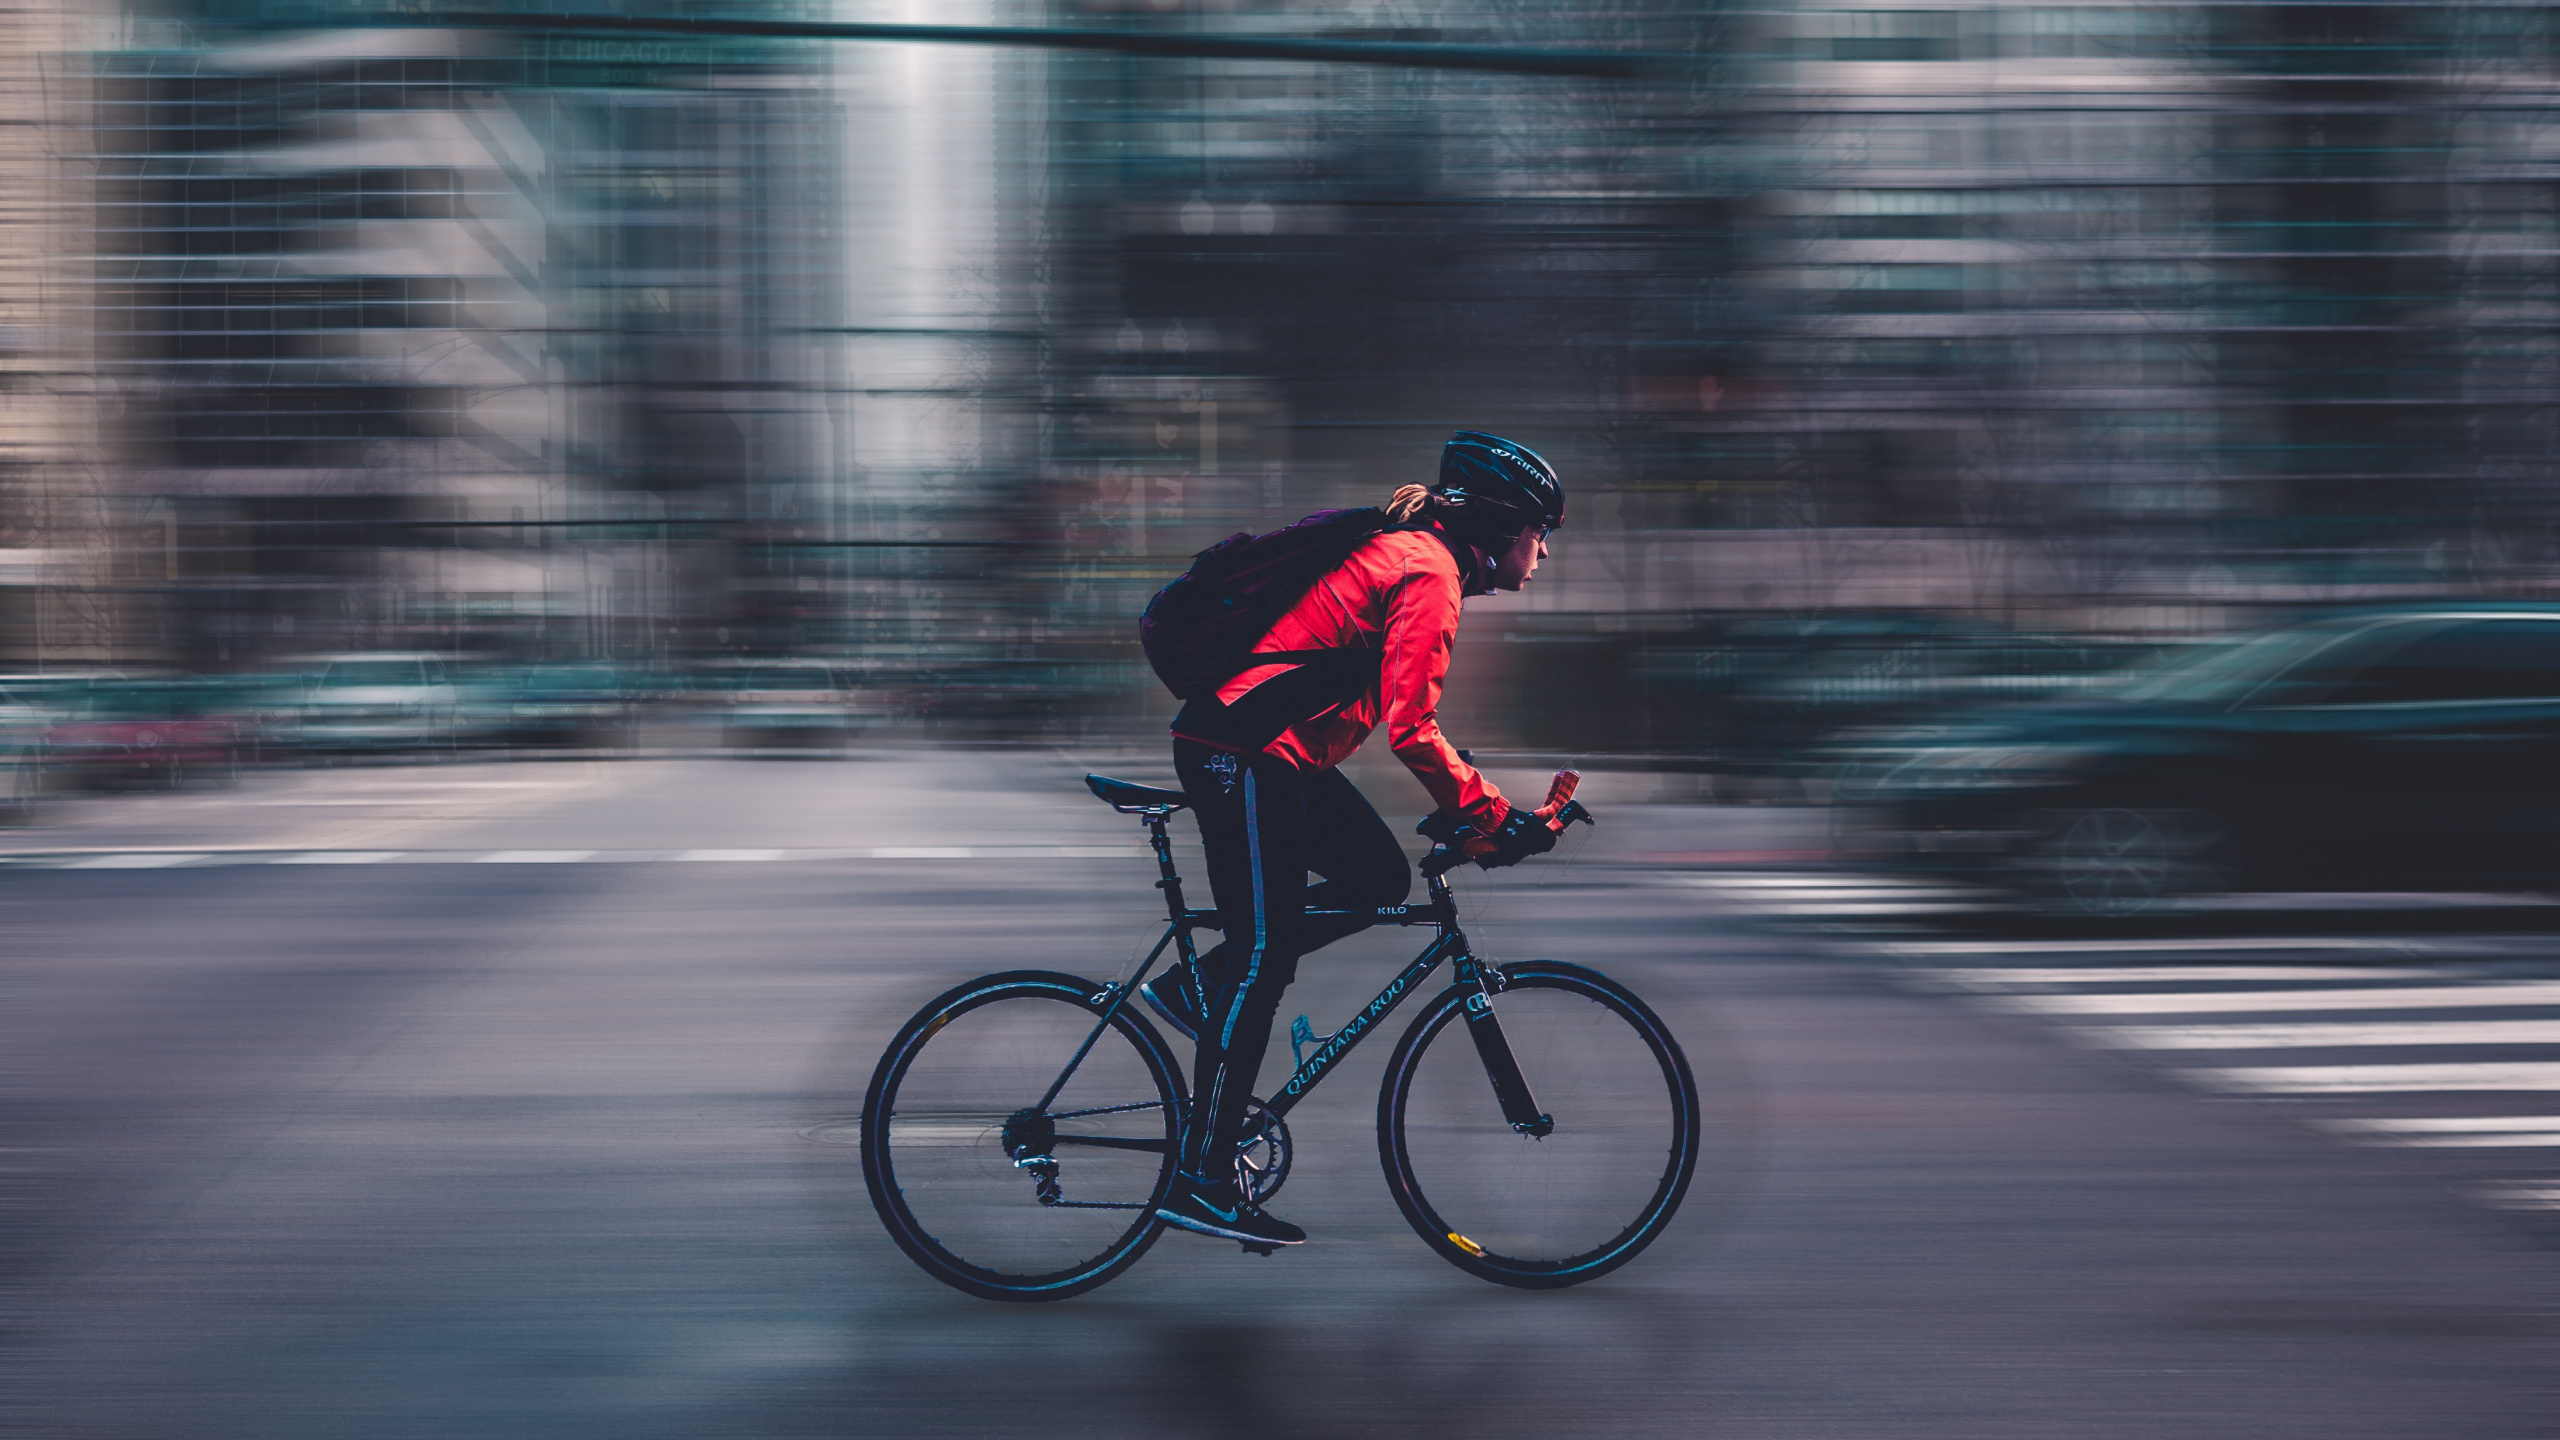 Man in Red Jacket Riding Bicycle Sur Route Pendant la Journée. Wallpaper in 2560x1440 Resolution